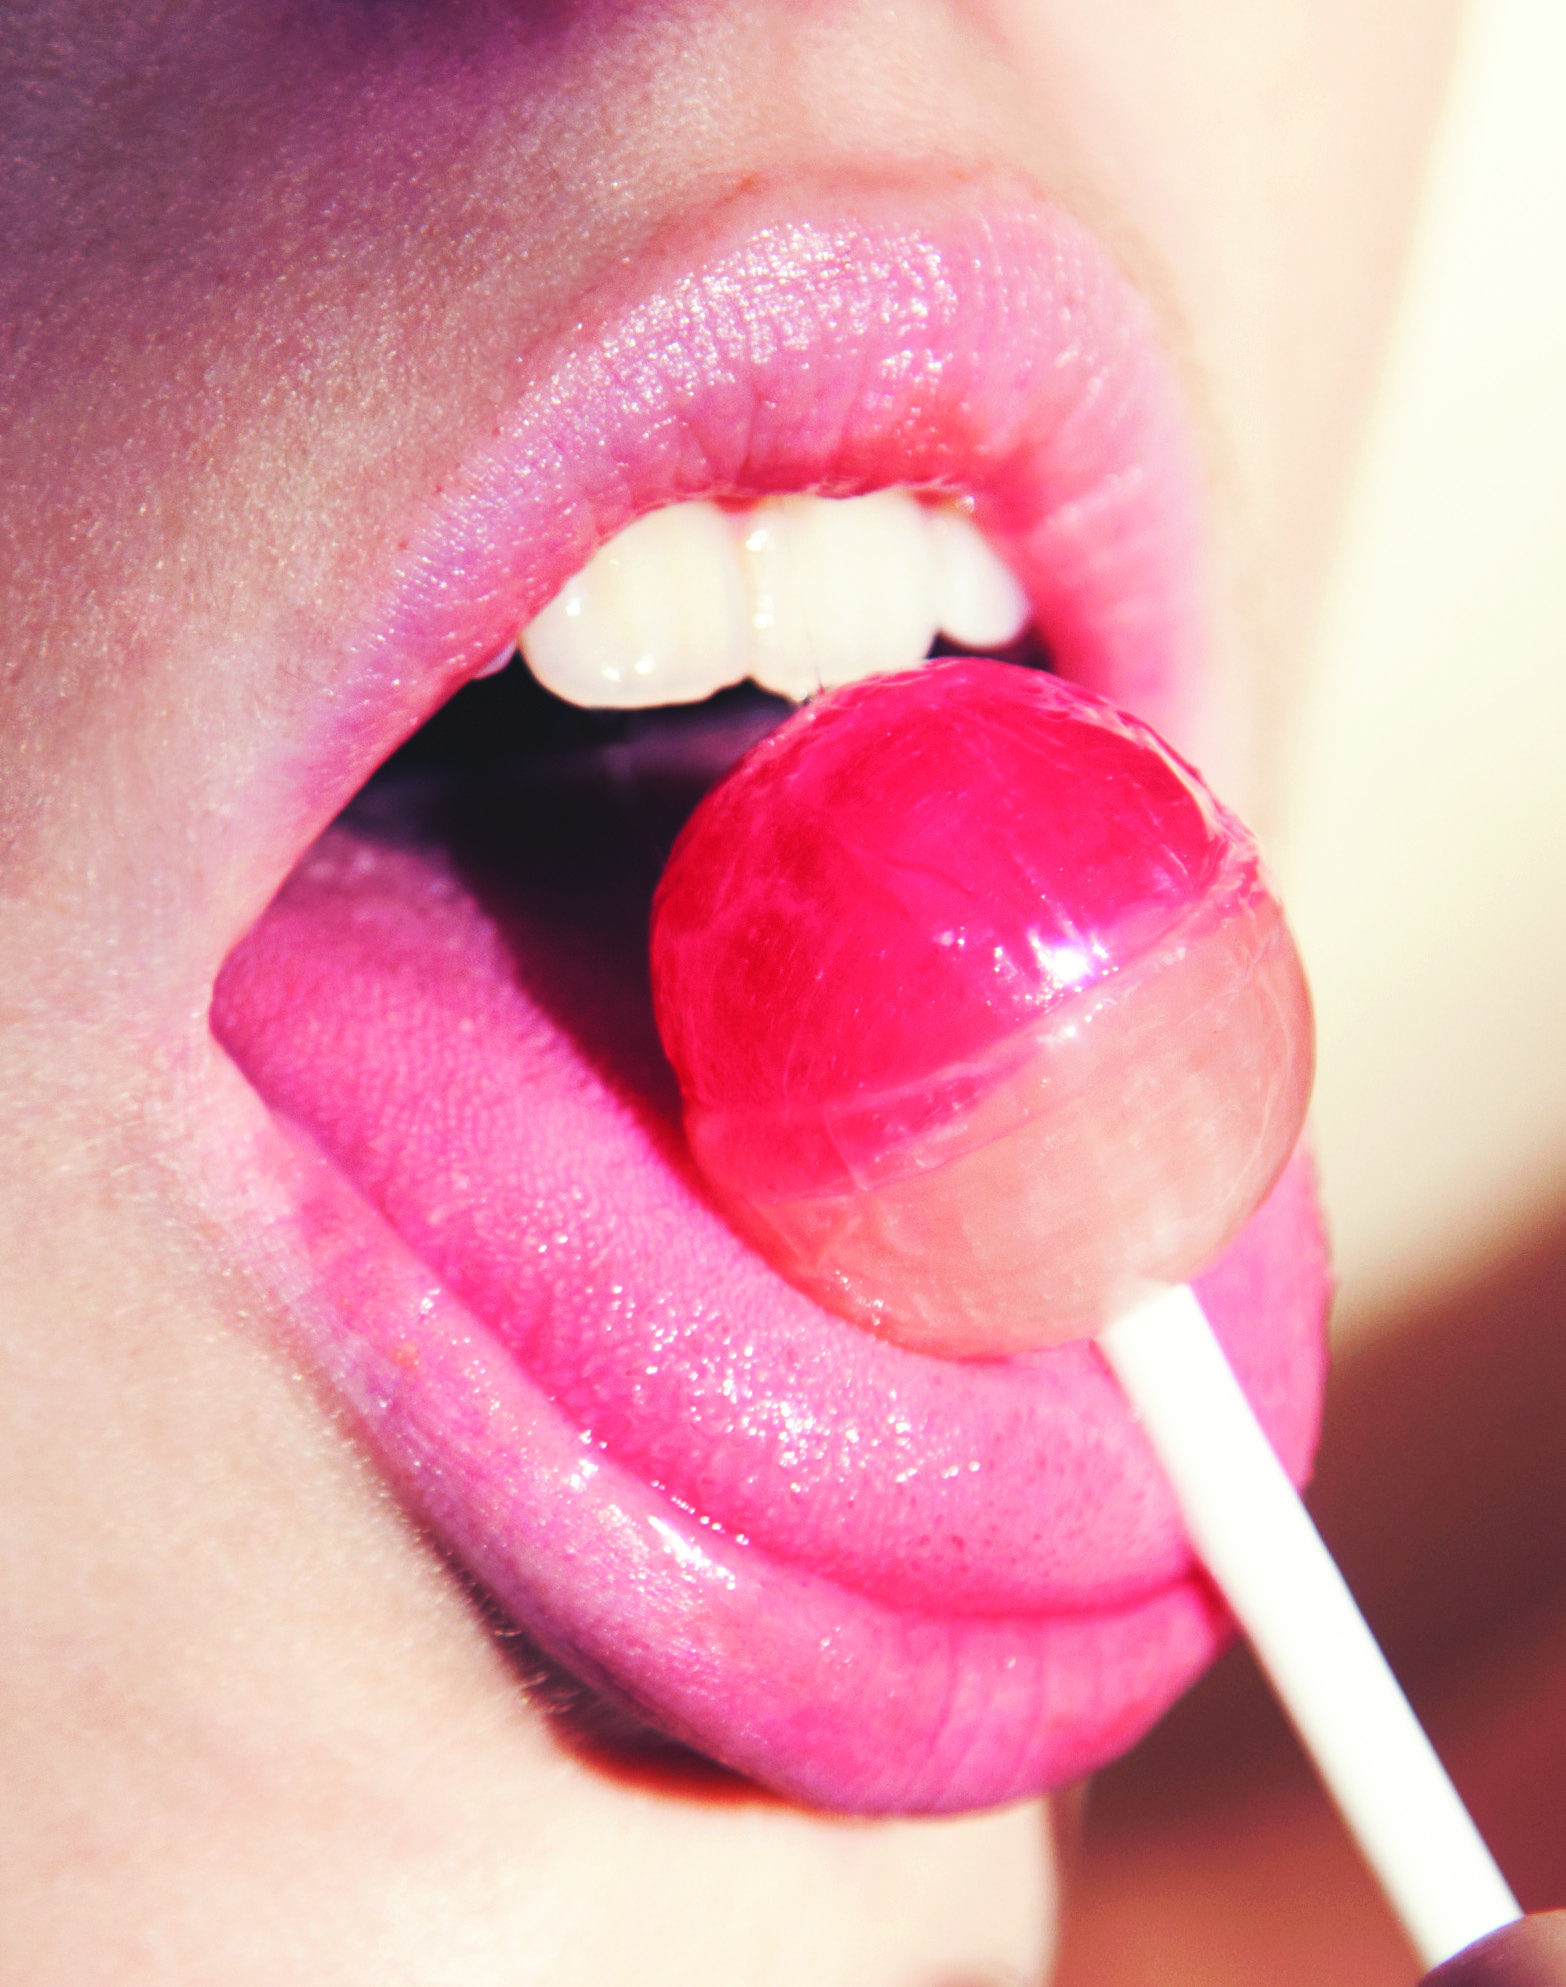 Women Model David Bellemere Mouth Lips Candy Lollipop Tongues Teeth 1566x1987